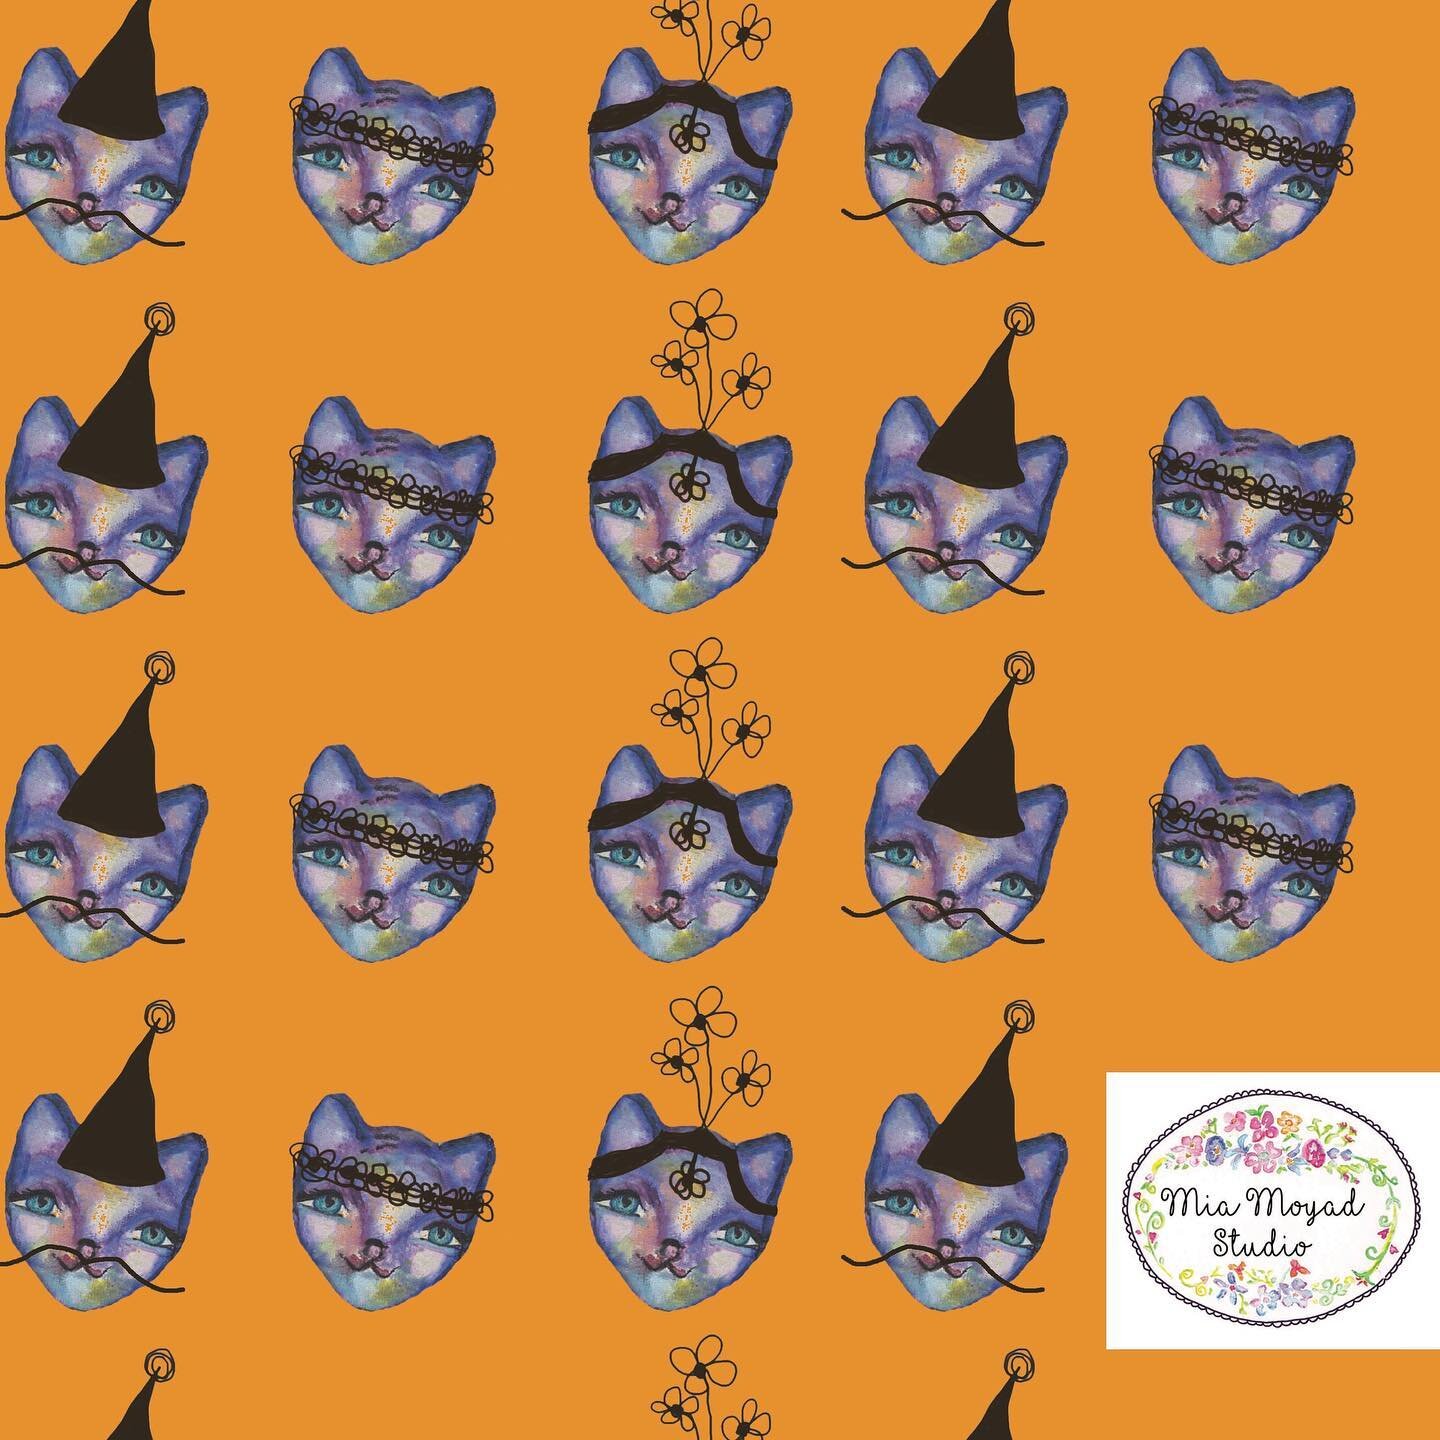 Boo!! Kitty Halloween party. May this day be blessed with unexpected and happy surprises!! 
.
.
#3x3designchallenge #sketchdesignrepeat #shannonmcnabstudio #surfacedesign #illustrationartists #giftwrapping #halloweendecor  #halloween